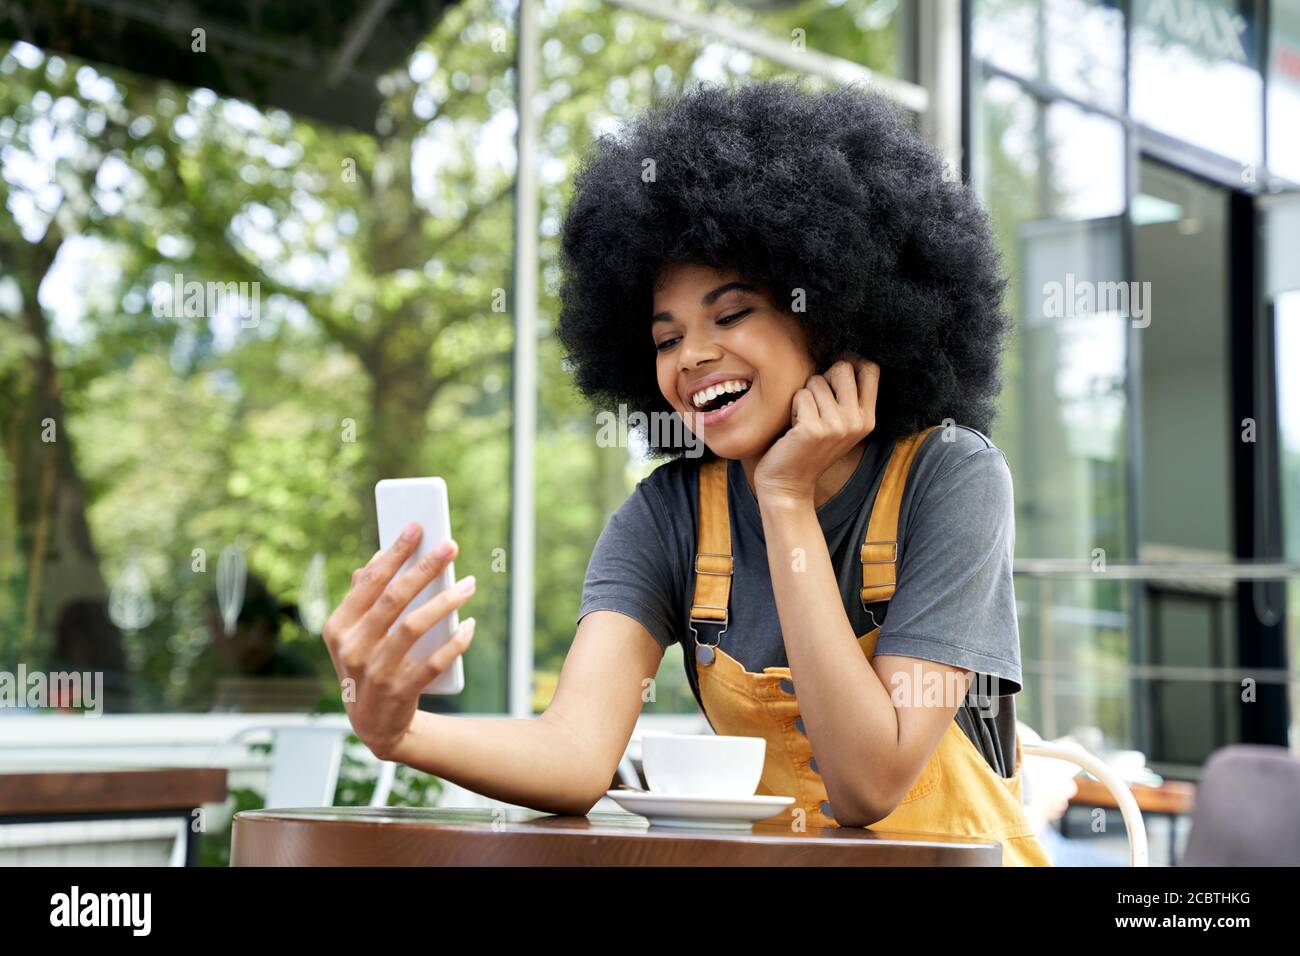 Happy African teen girl making video call on phone sits at outdoor cafe table. Stock Photo